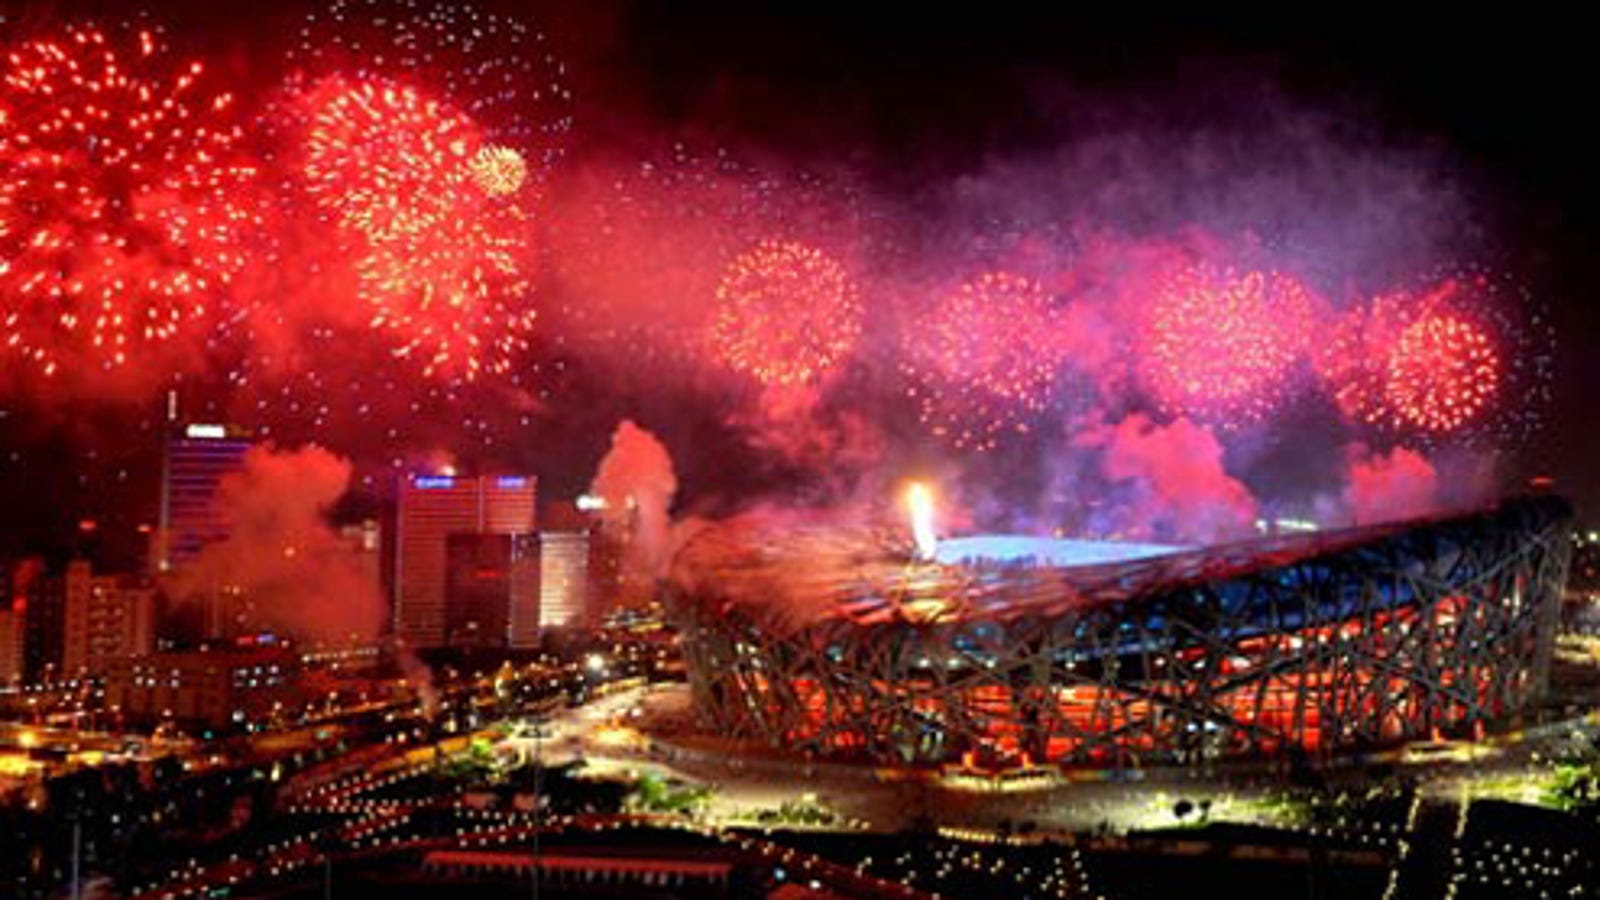 beijing fireworks olympic 2008 olympics ceremony festival spring china closing games opening chinese dunhuang bejing line light gizmodo whizzes outstanding